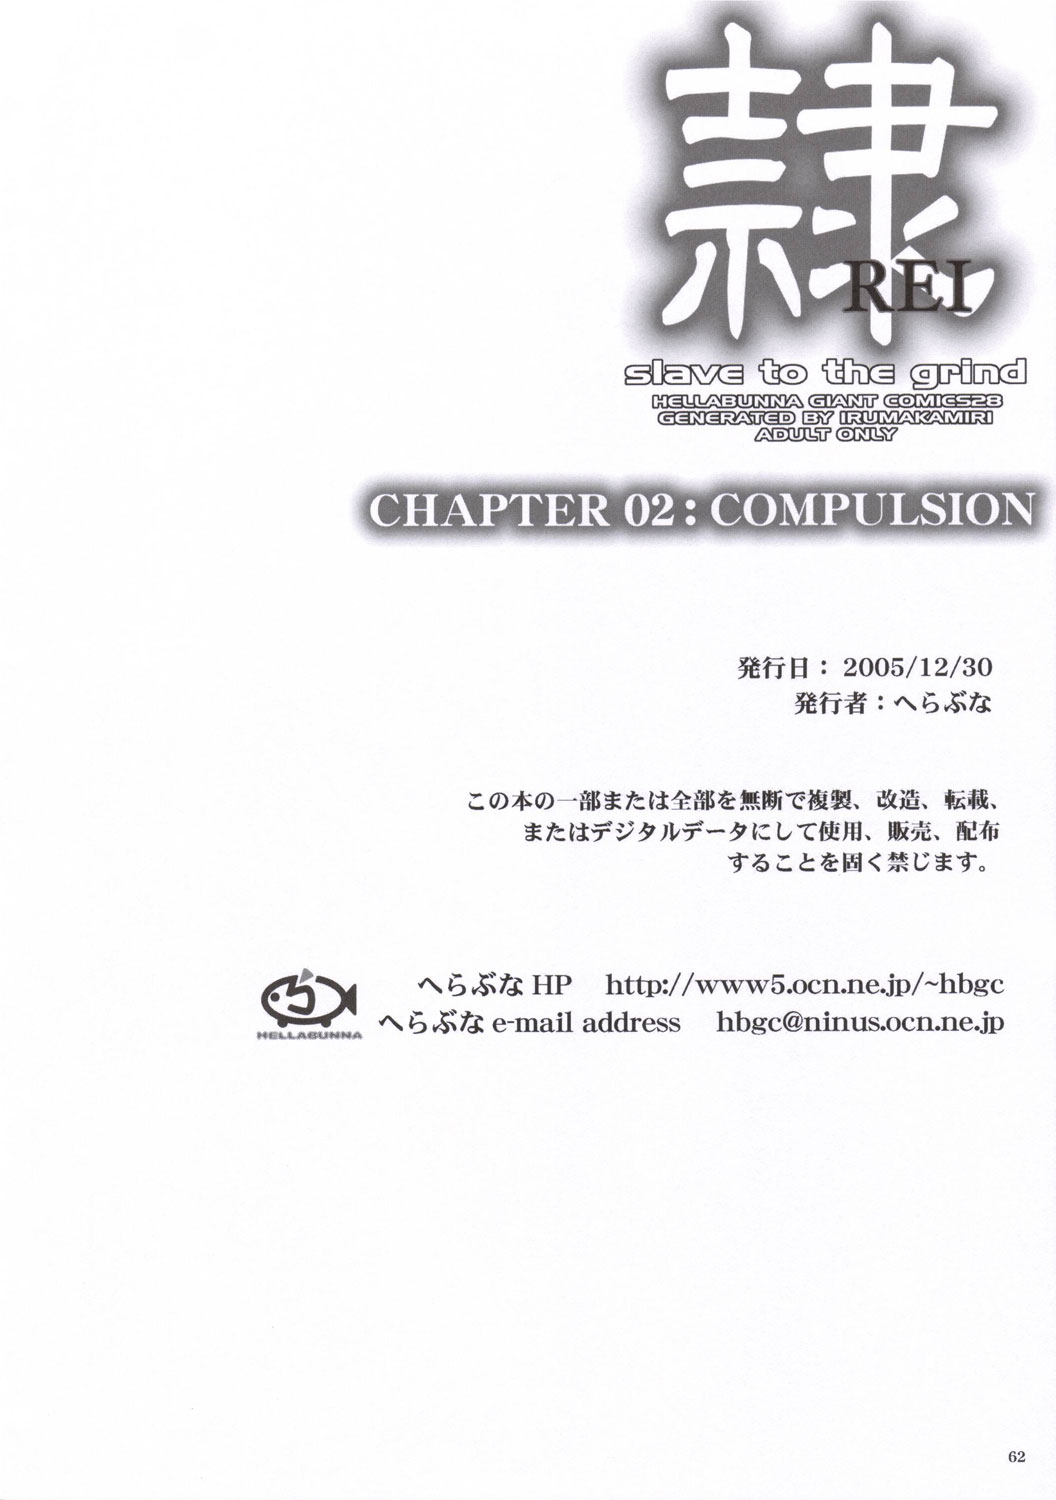 REI - slave to the grind - CHAPTER 02: COMPULSION numero d'image 58